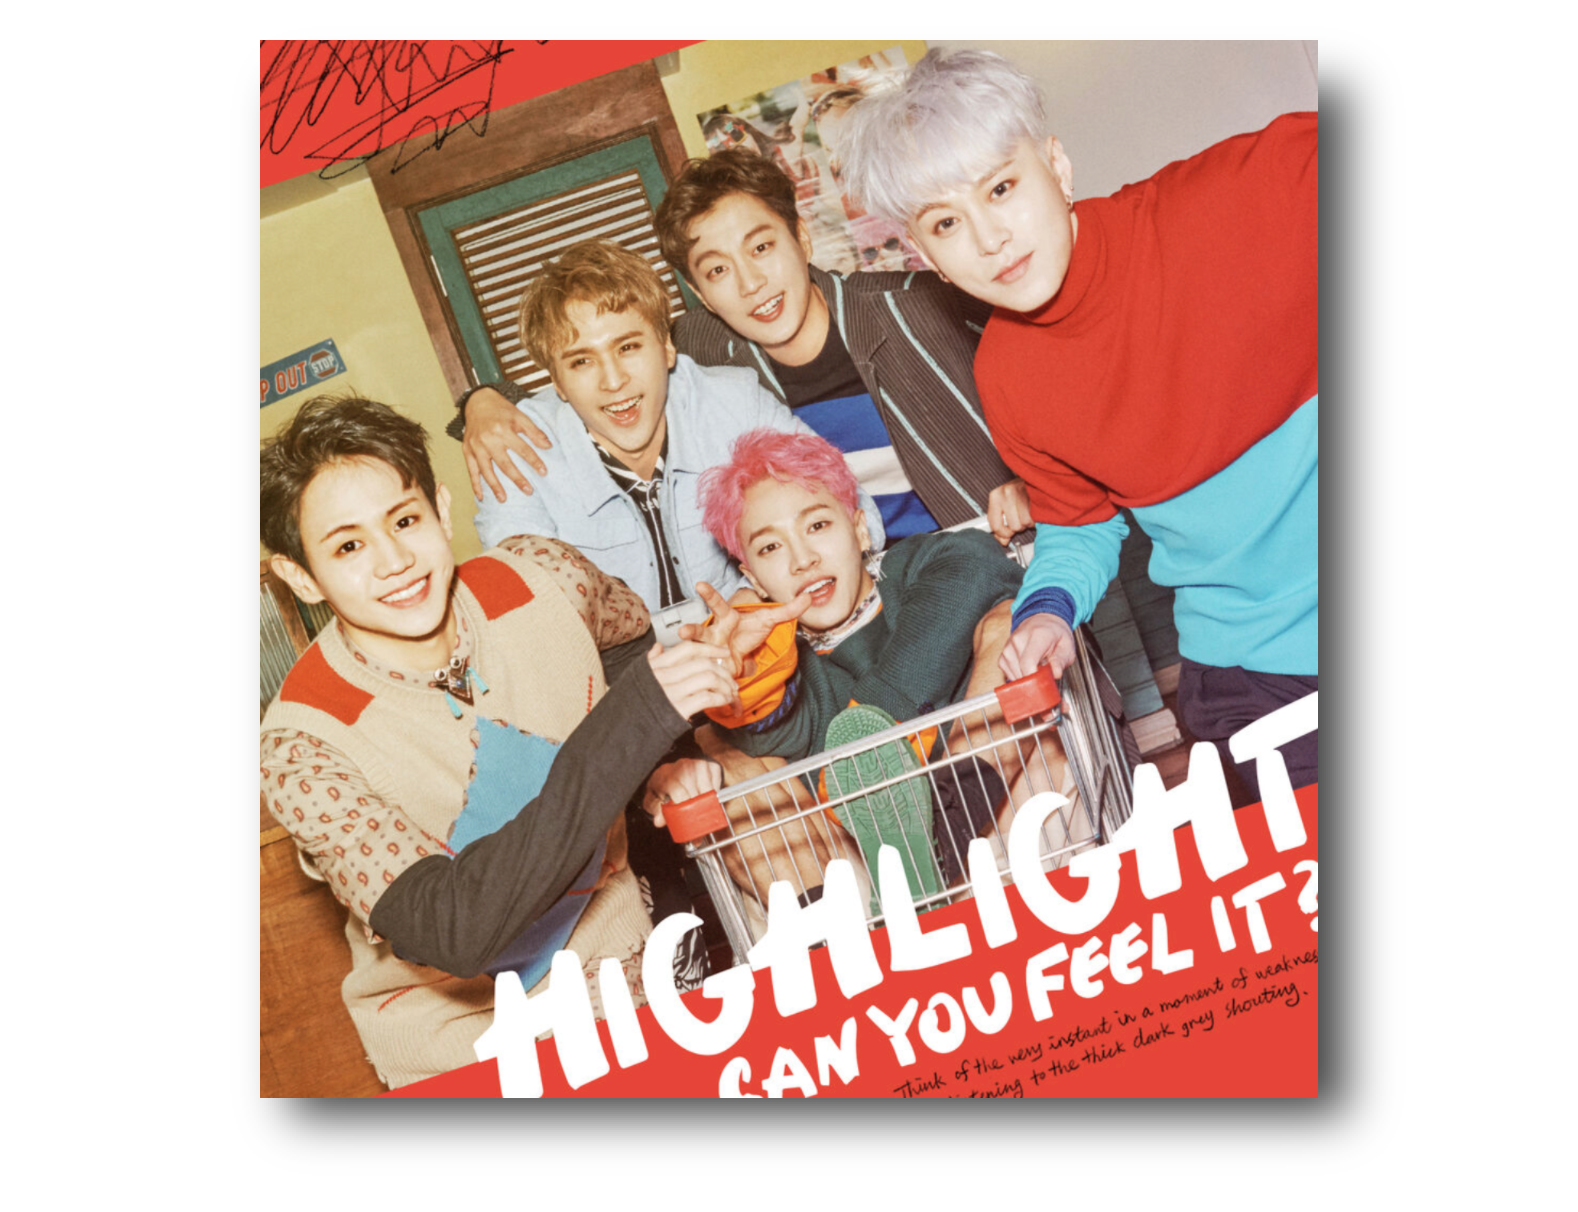 Highlight - CAN YOU FEEL IT?